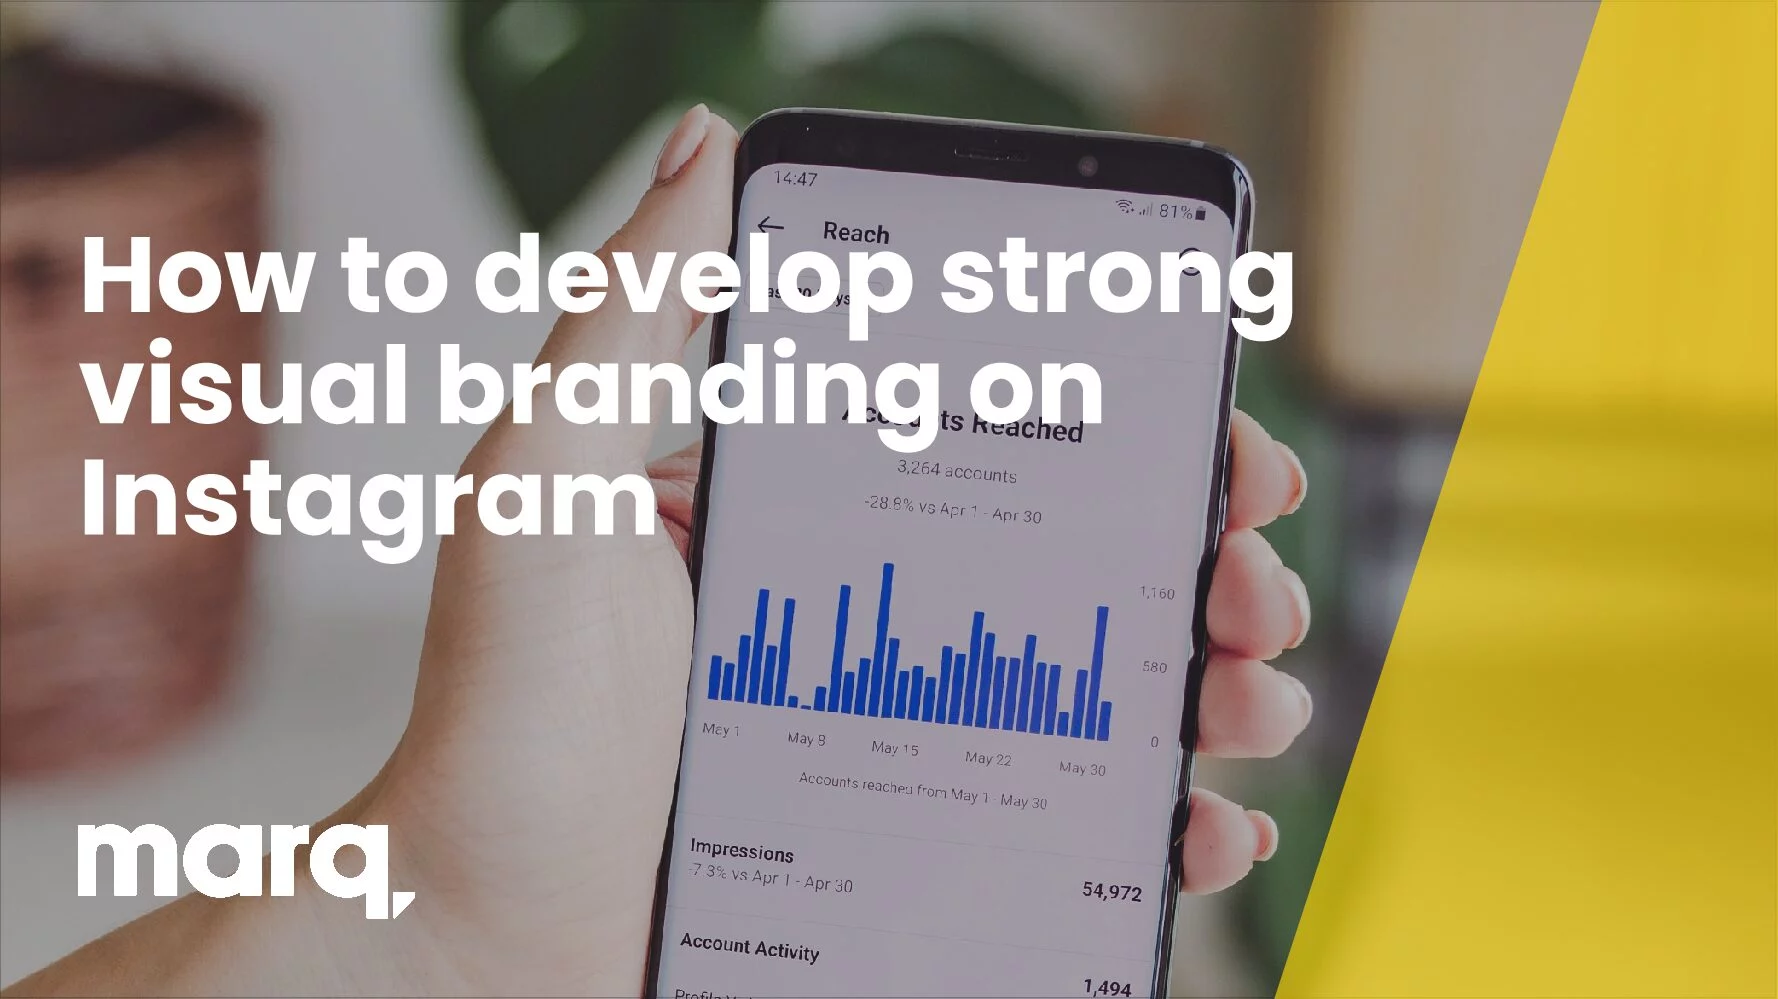 How to develop strong visual branding on Instagram